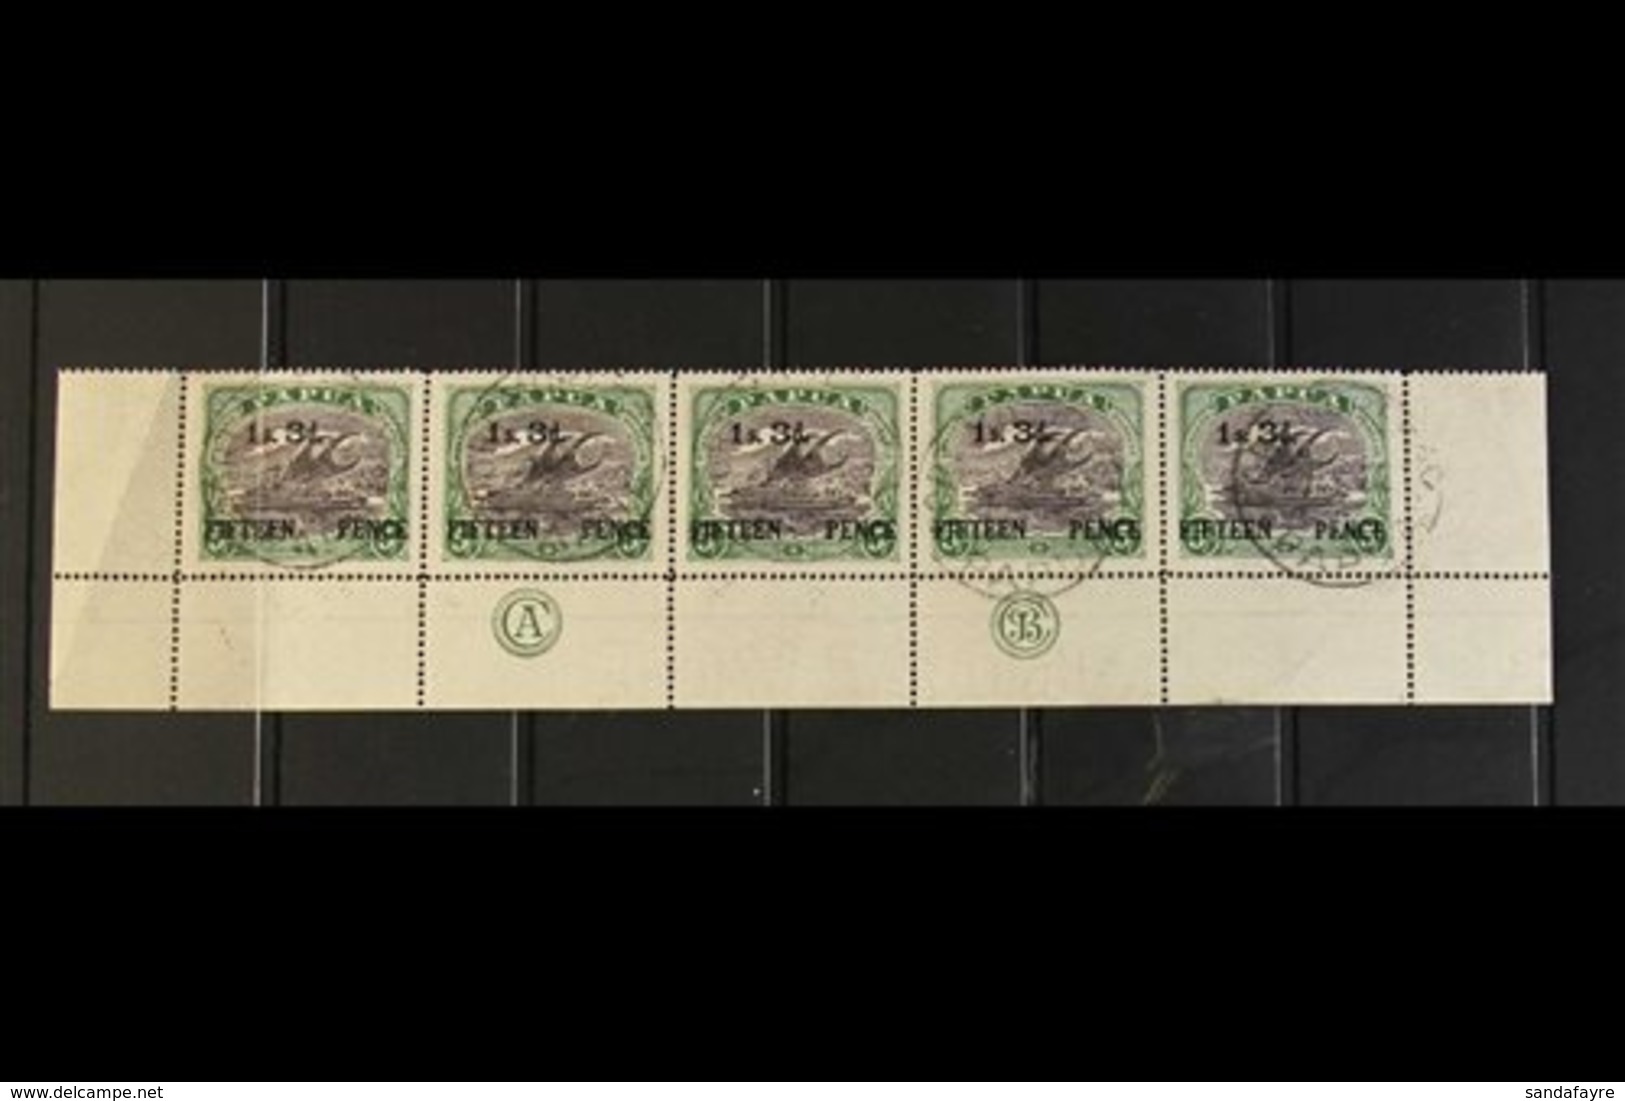 1931 1s3d On 5s Black And Deep Green, SG 123, Complete Lower Row Of The Sheet Showing JBC Imprint, Fine Port Moresby Cds - Papua-Neuguinea